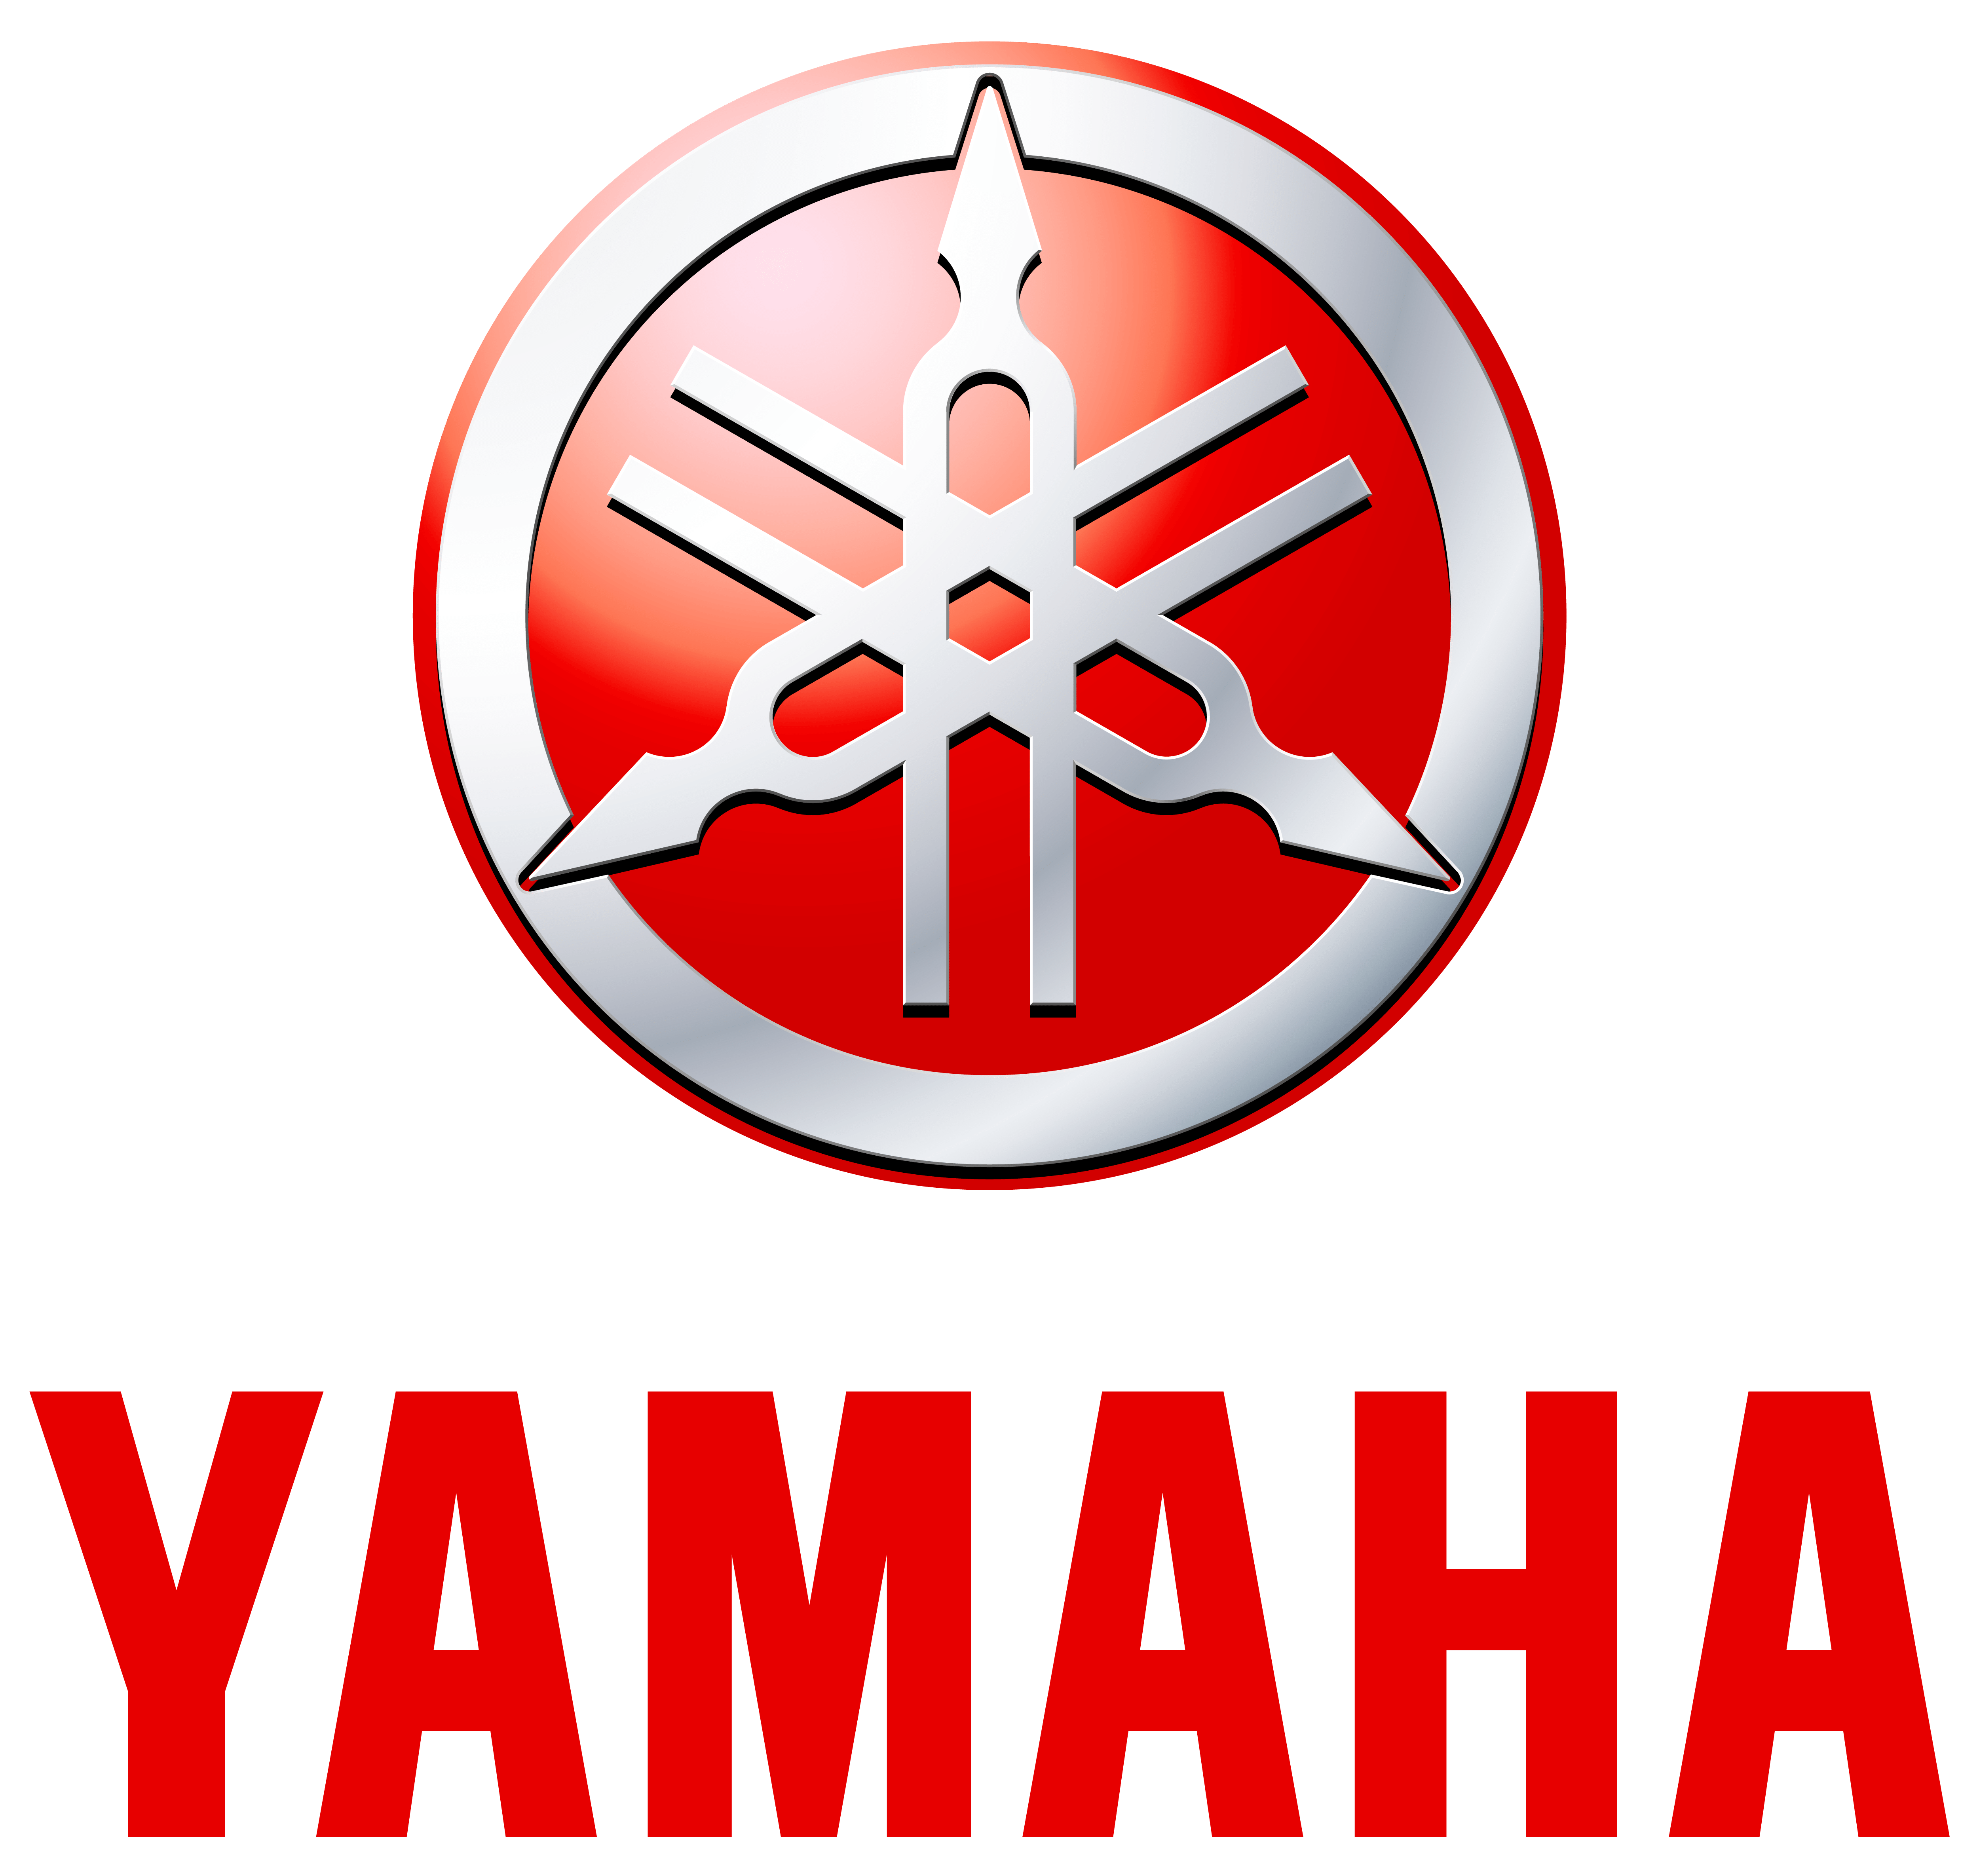 All Red for All Company Logo - Yamaha logo | Motorcycle Brands